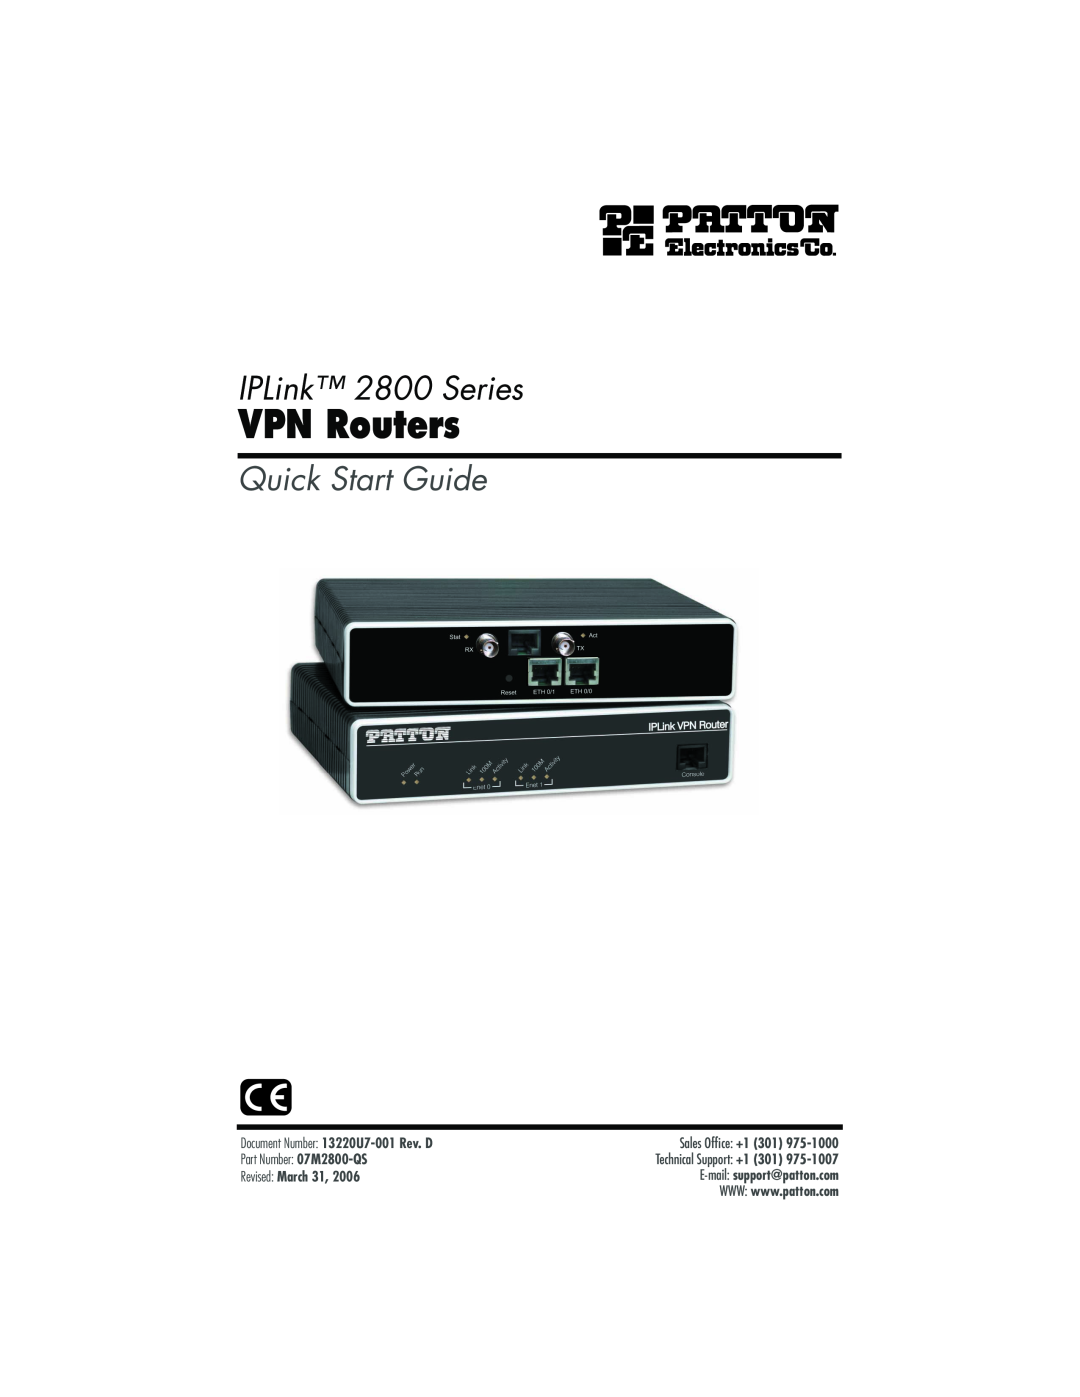 Patton electronic quick start VPN Routers, IPLink 2800 Series, Quick Start Guide, Document Number 13220U7-001 Rev. D 